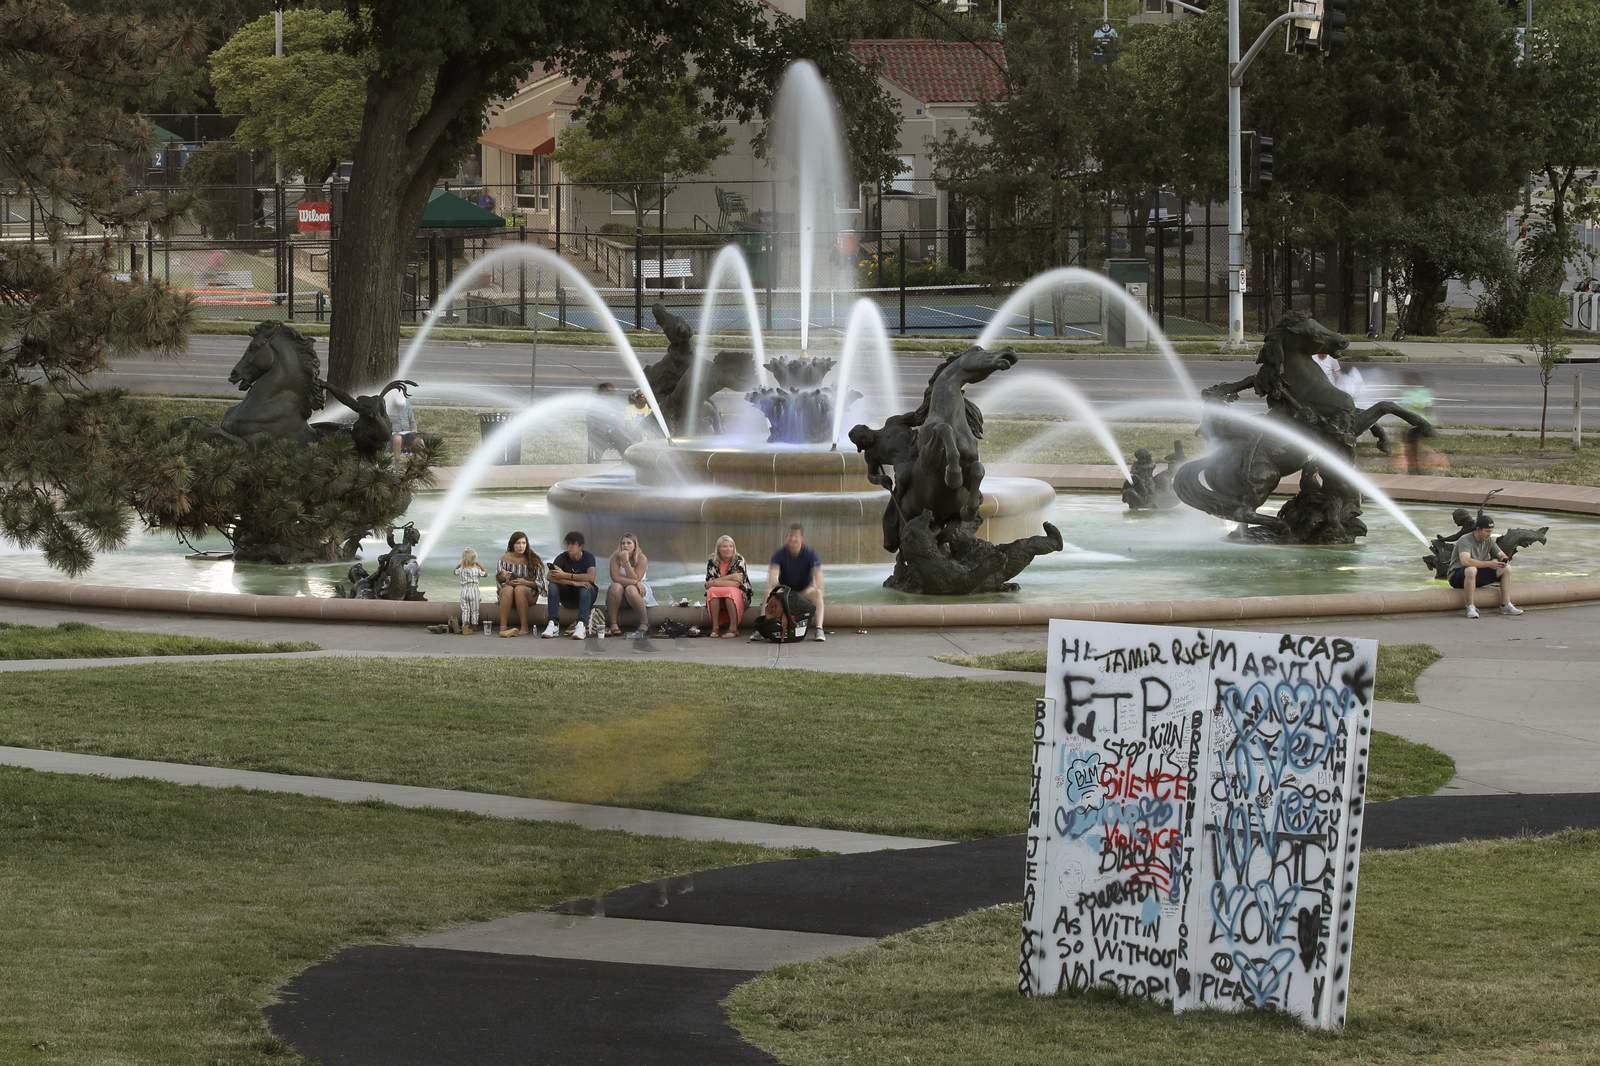 Protests spark move to rename iconic Kansas City fountain